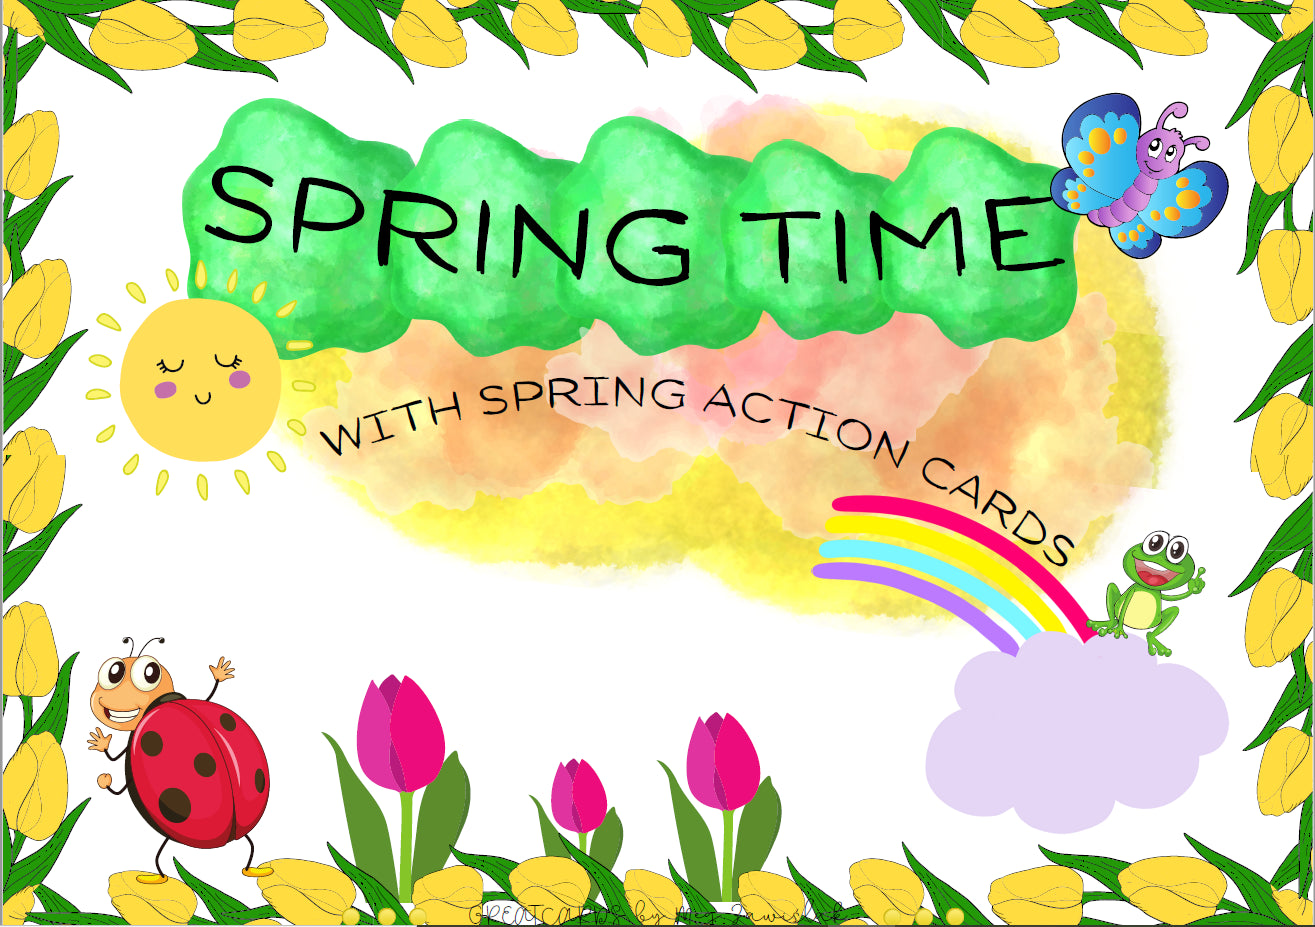 Greatcards - Spring Time with Spring Action Cards